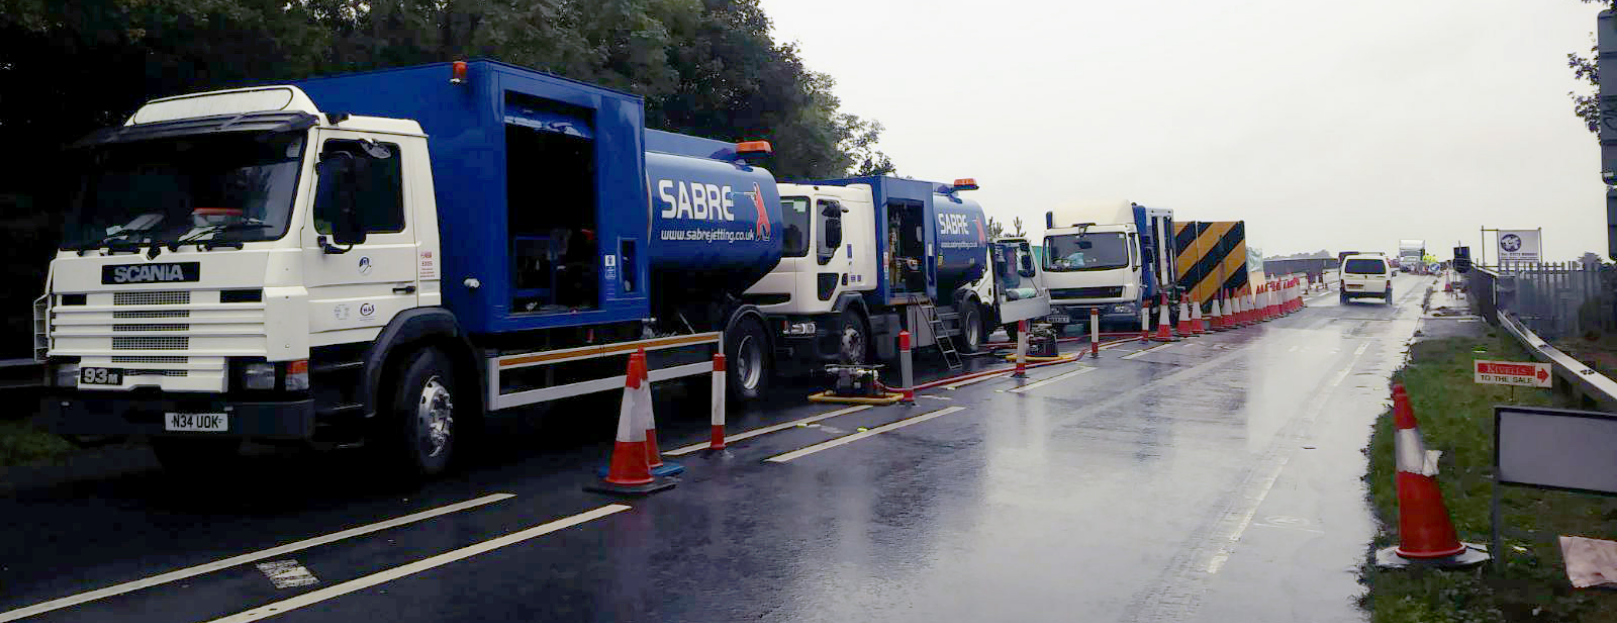 Sabre Jetting operative team at M27 Junction 9 hydrodemolition project